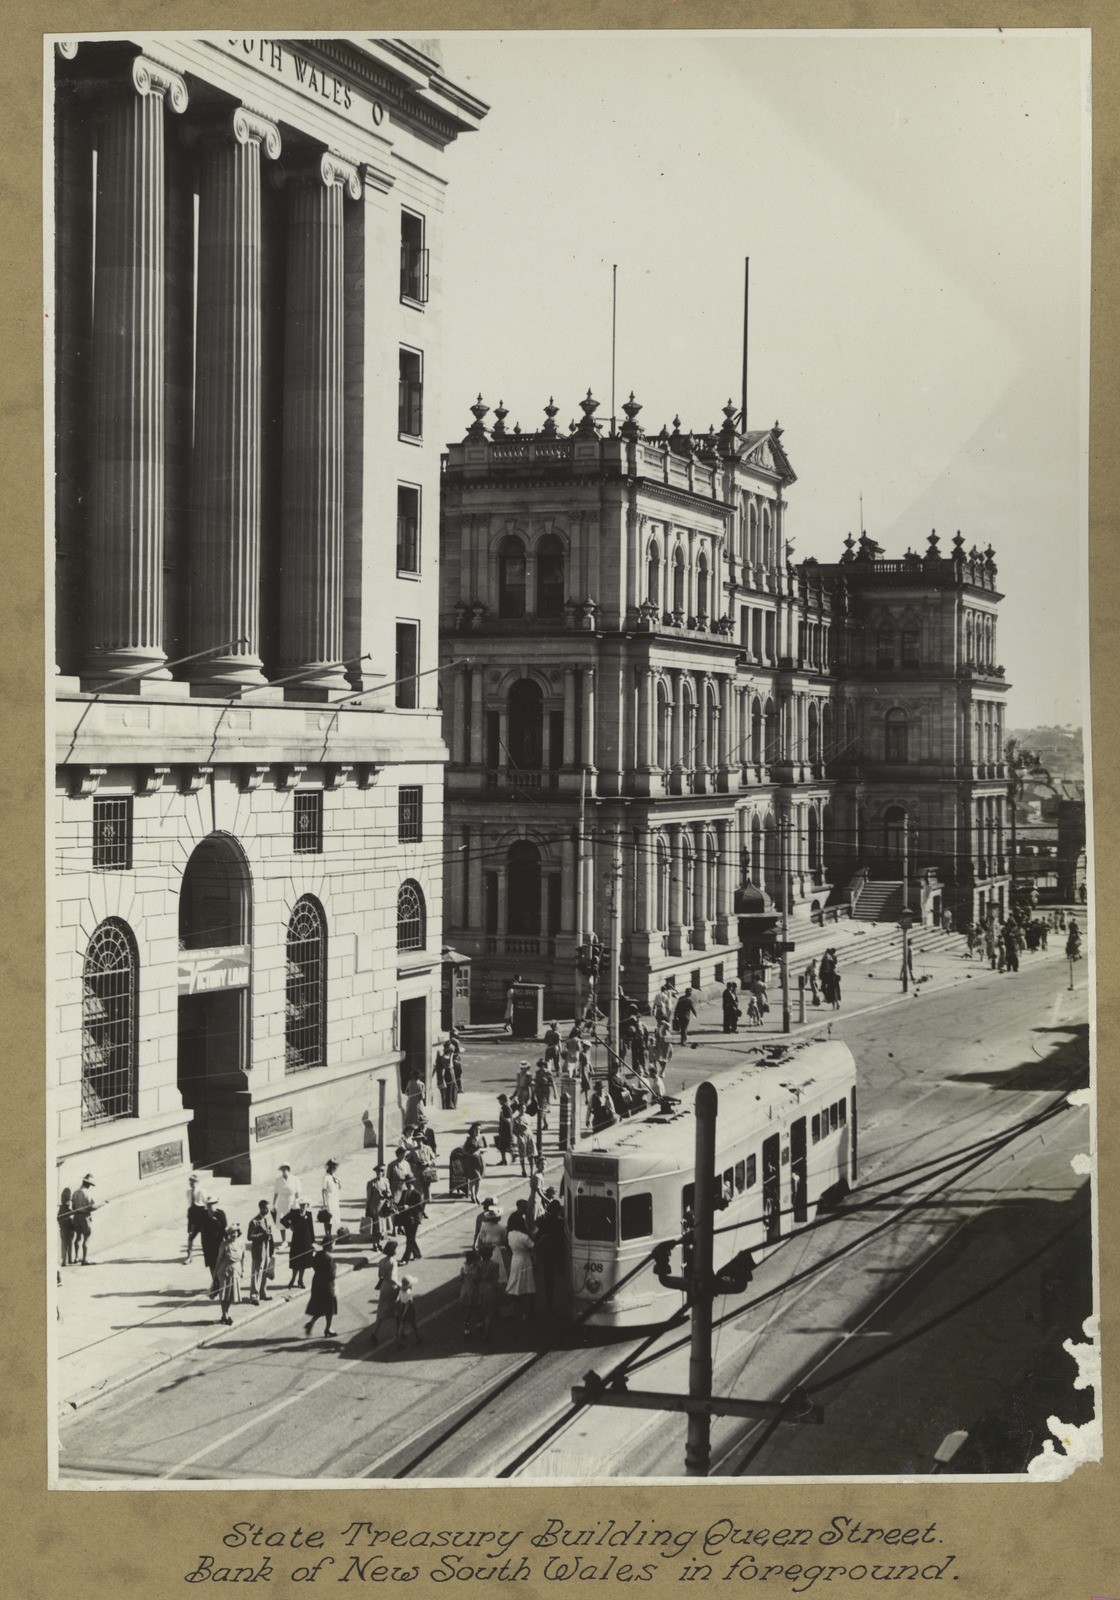 Bank of NSW in foreground ca 1938  Image No API-075-0001-0002